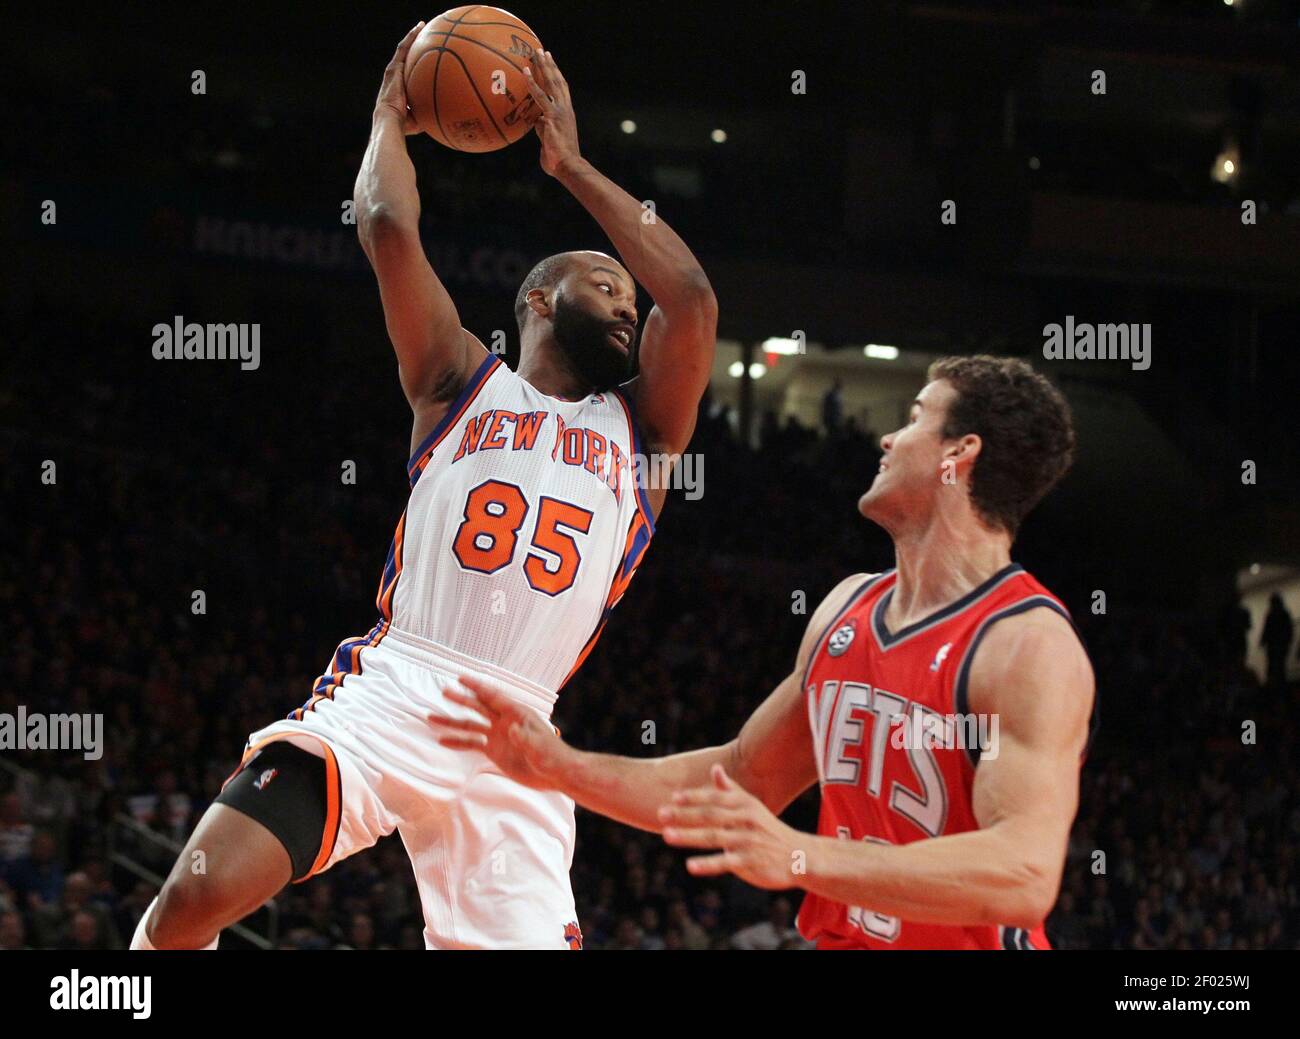 The New York Knicks' Baron Davis (85) looks to pass against the New Jersey  Nets' Kris Humphries (43) at Madison Square Garden in New York City,  Monday, February 20 2012. (Photo by